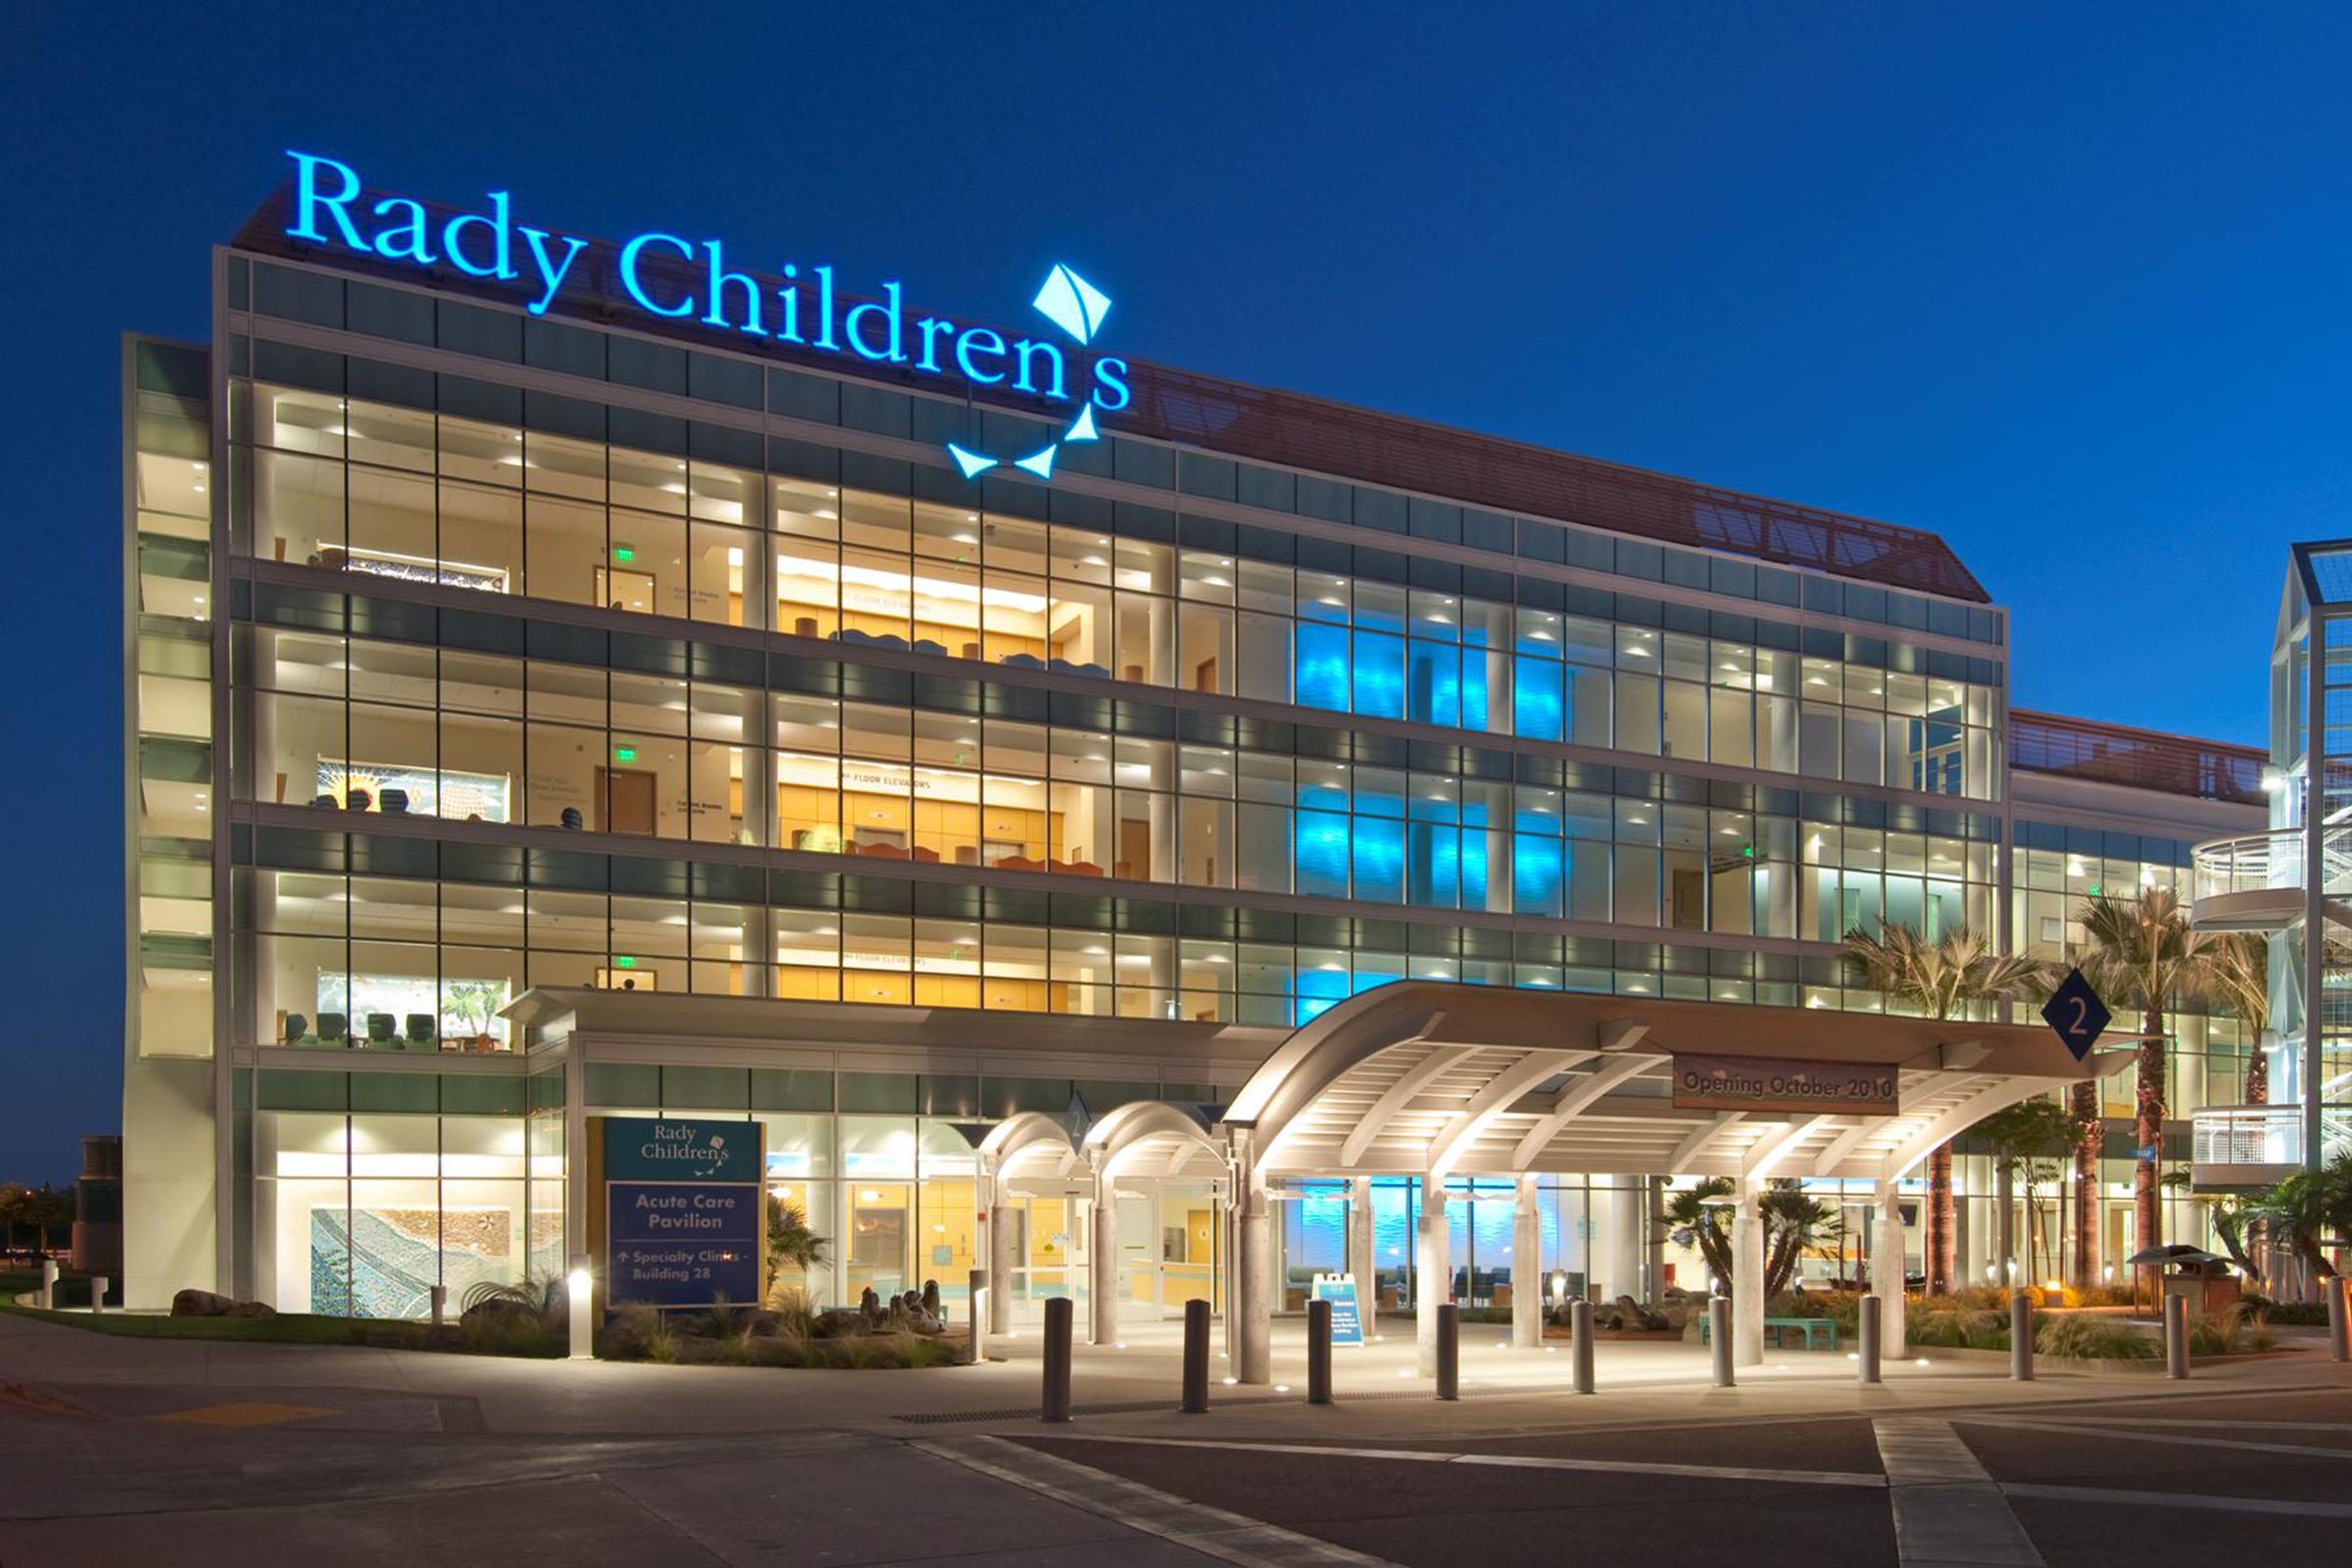 Rady Children's Selects Luna to Broaden its Outpatient Physical Therapy Services with Home-Based Care